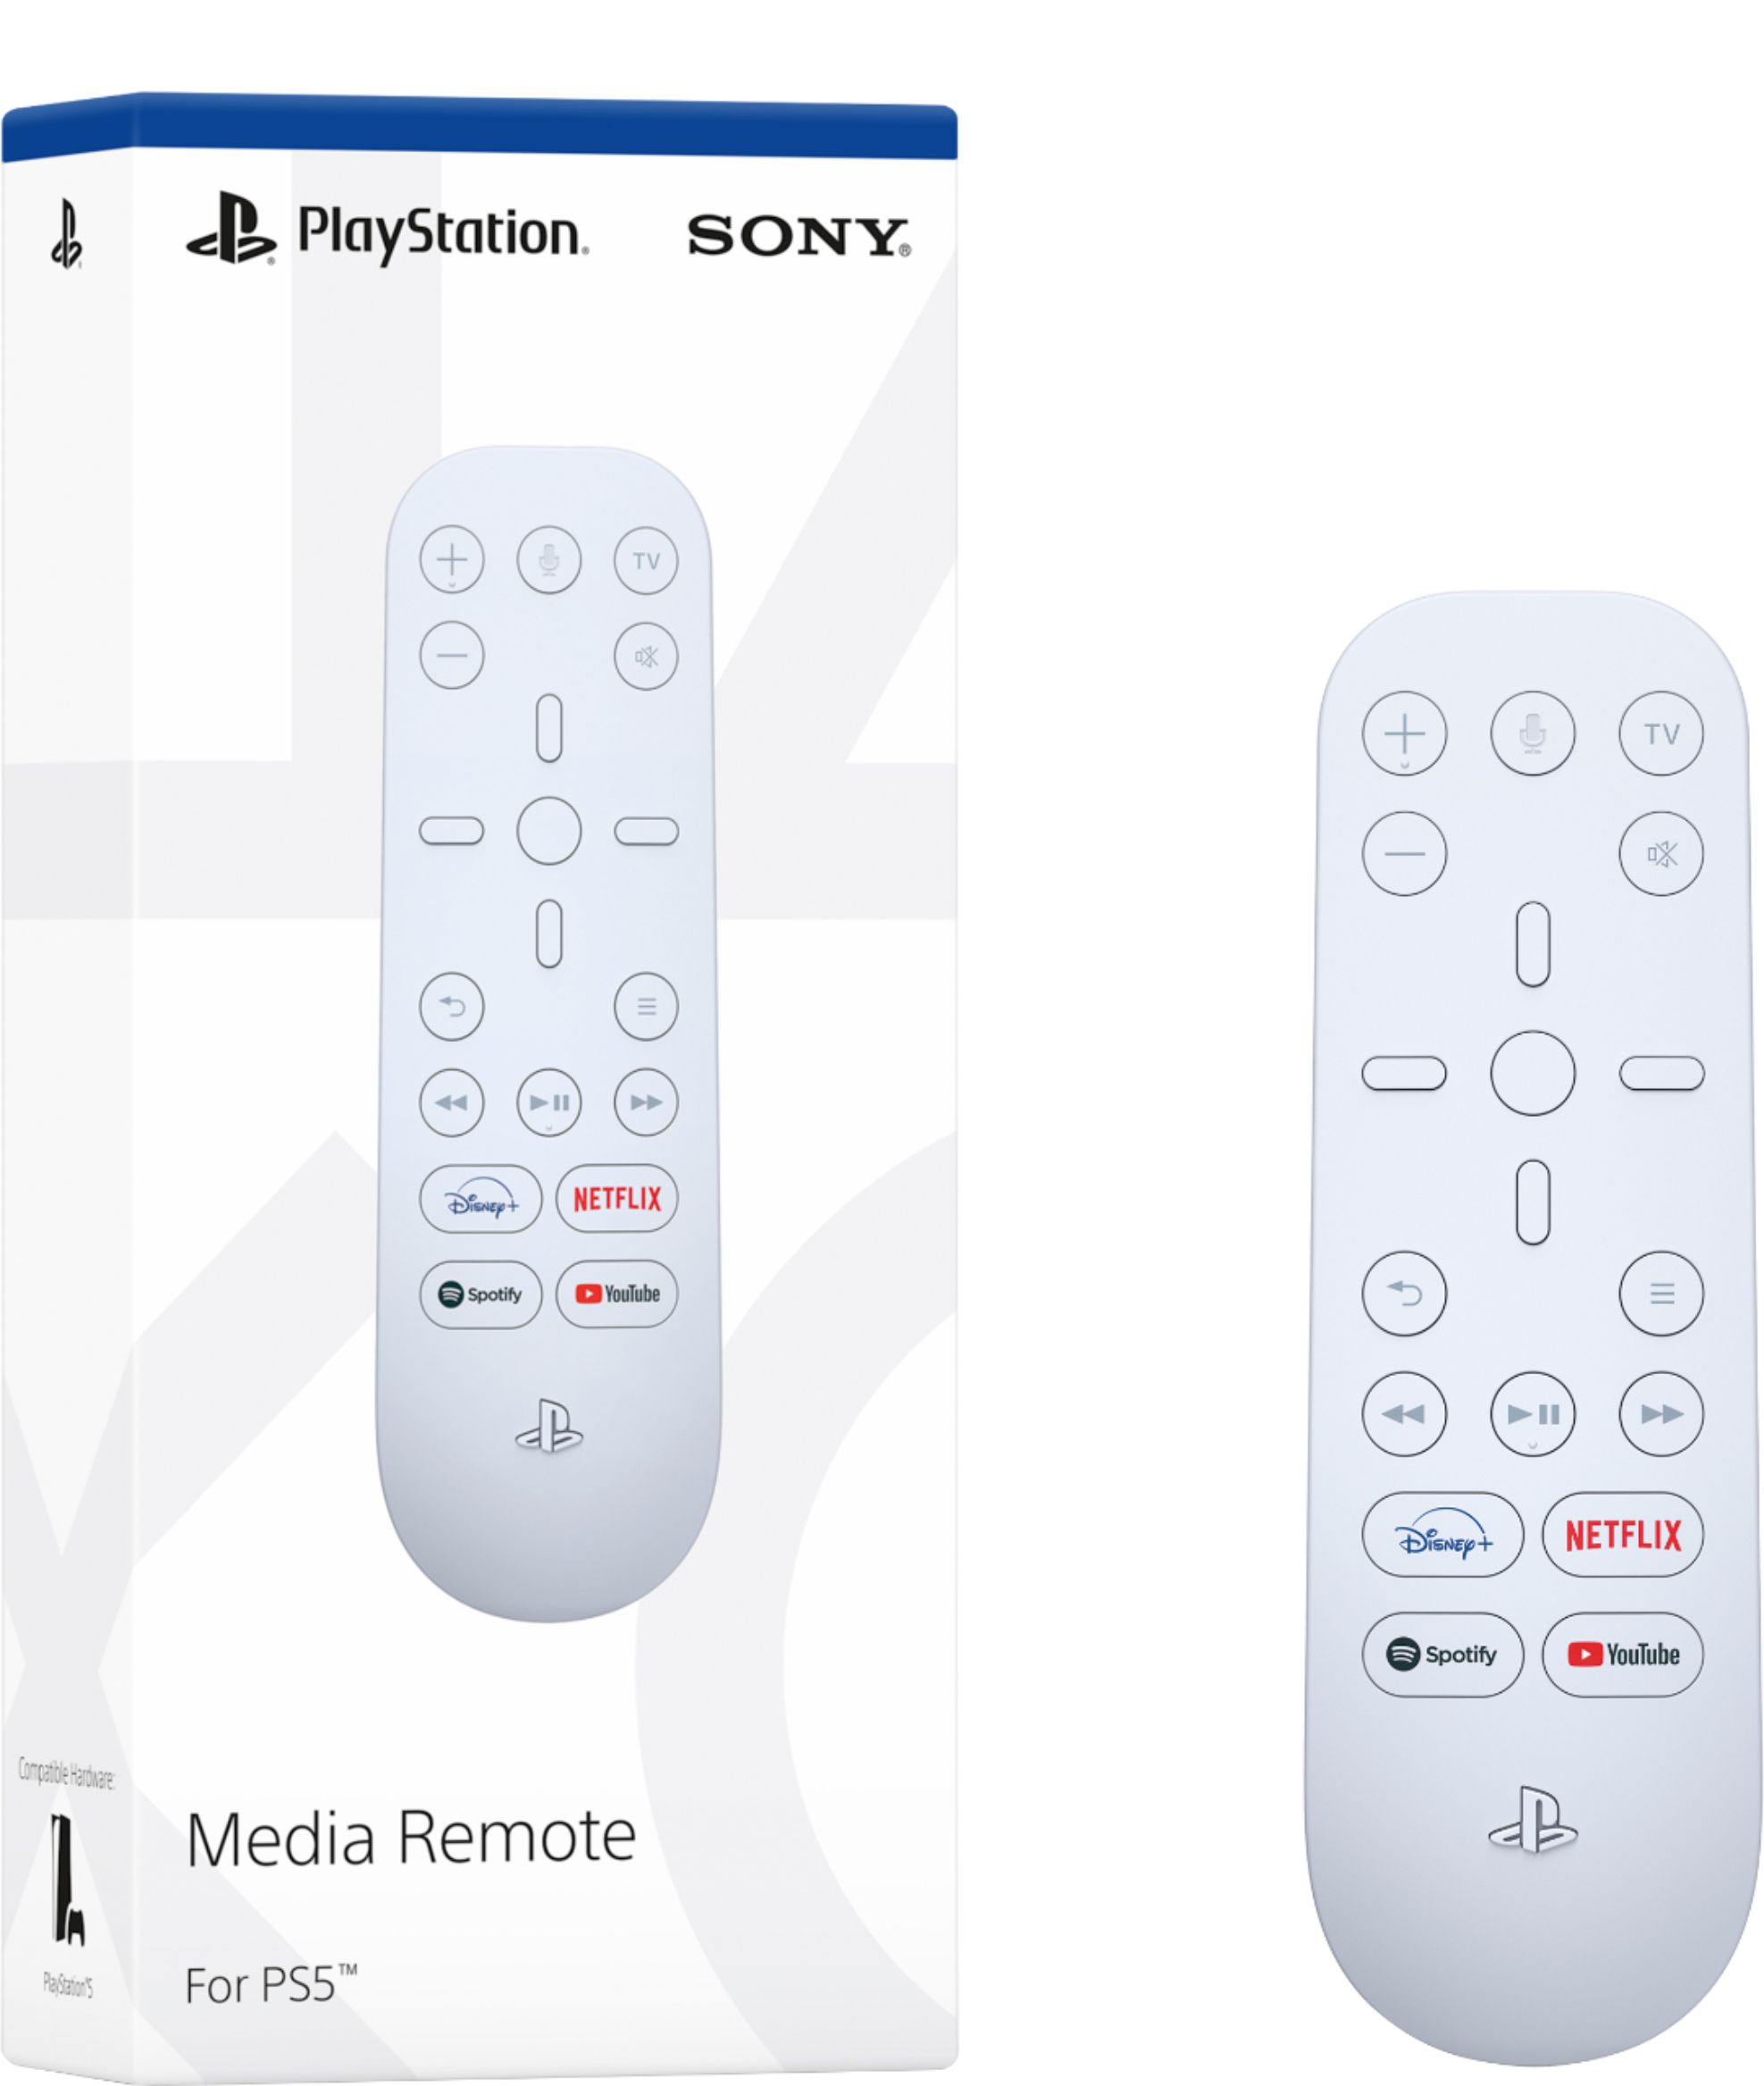 ps3 media remote on ps4